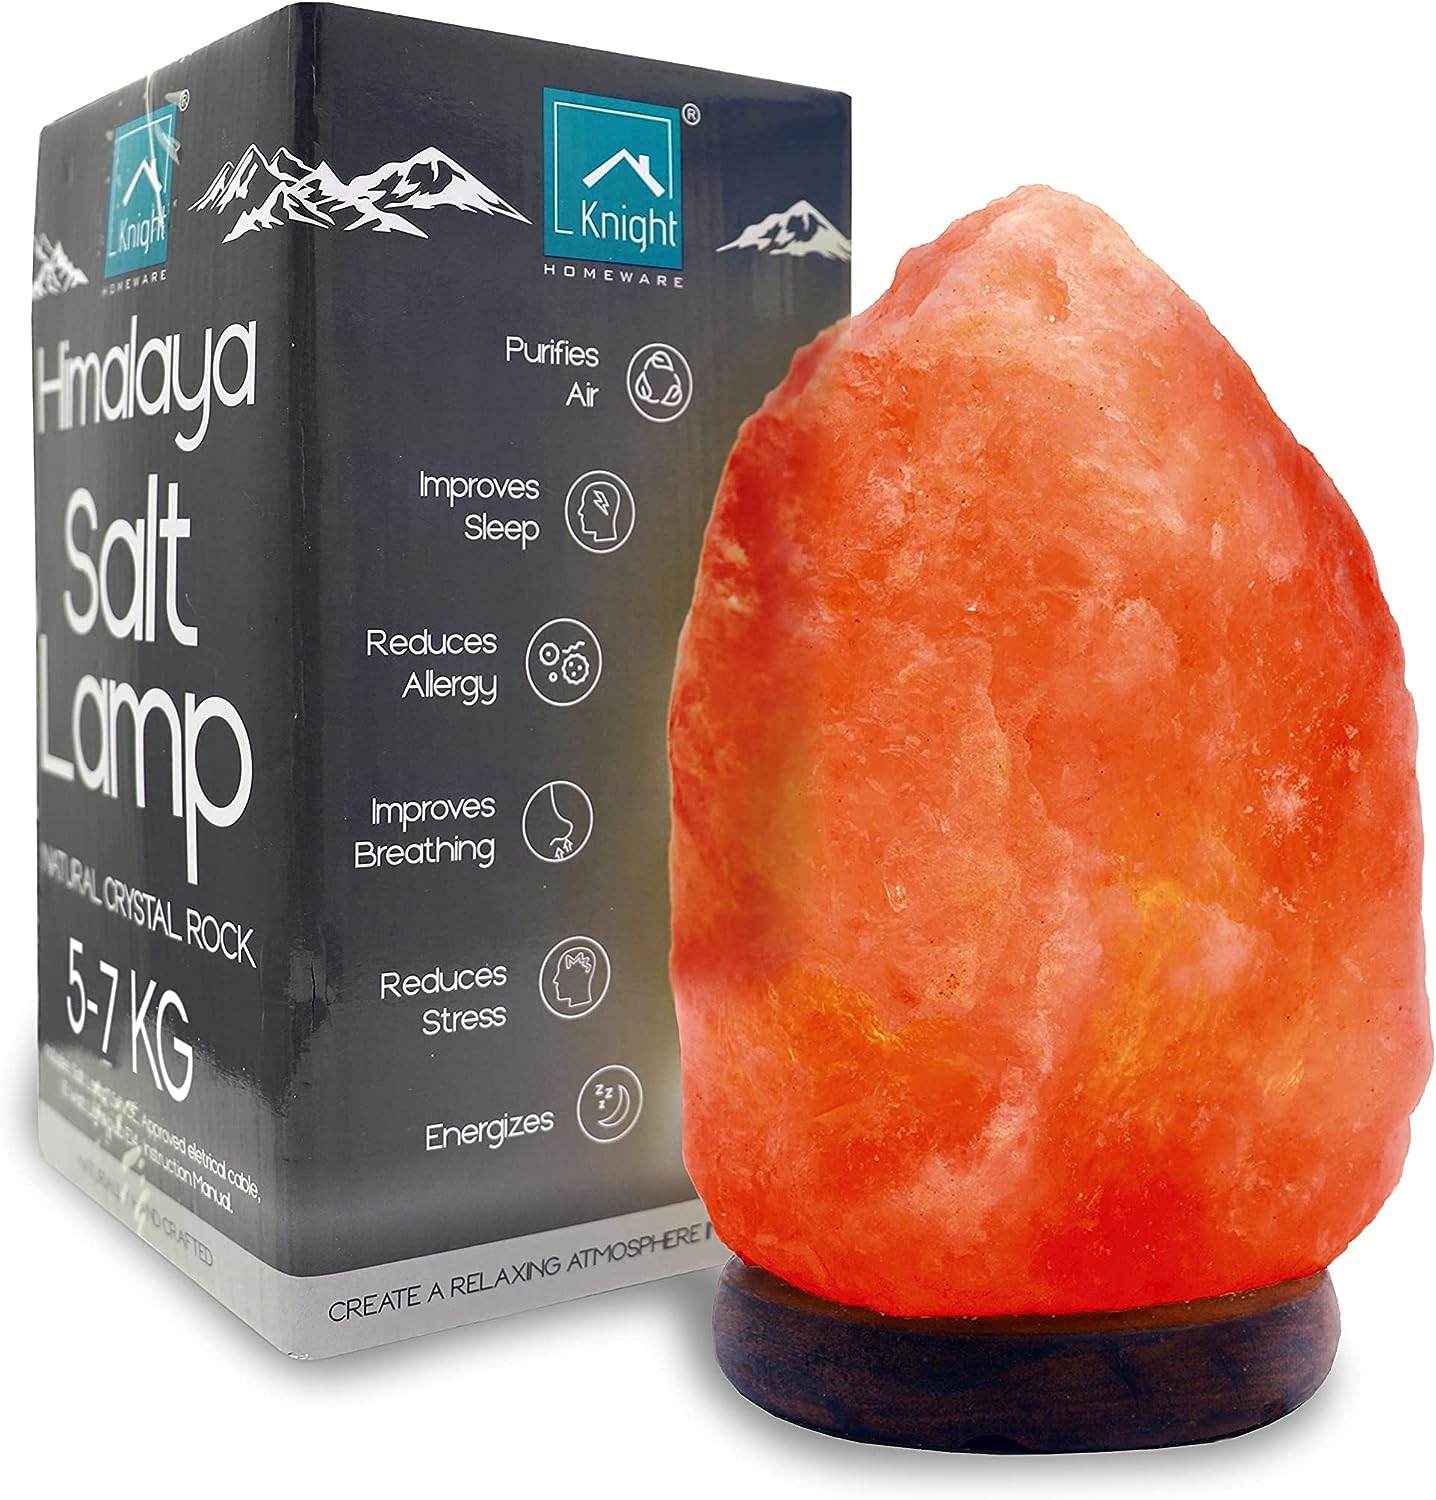 KNIGHT Authentic Himalayan Salt Lamp 5-7 Kg RRP 13.49 CLEARANCE XL 11.99